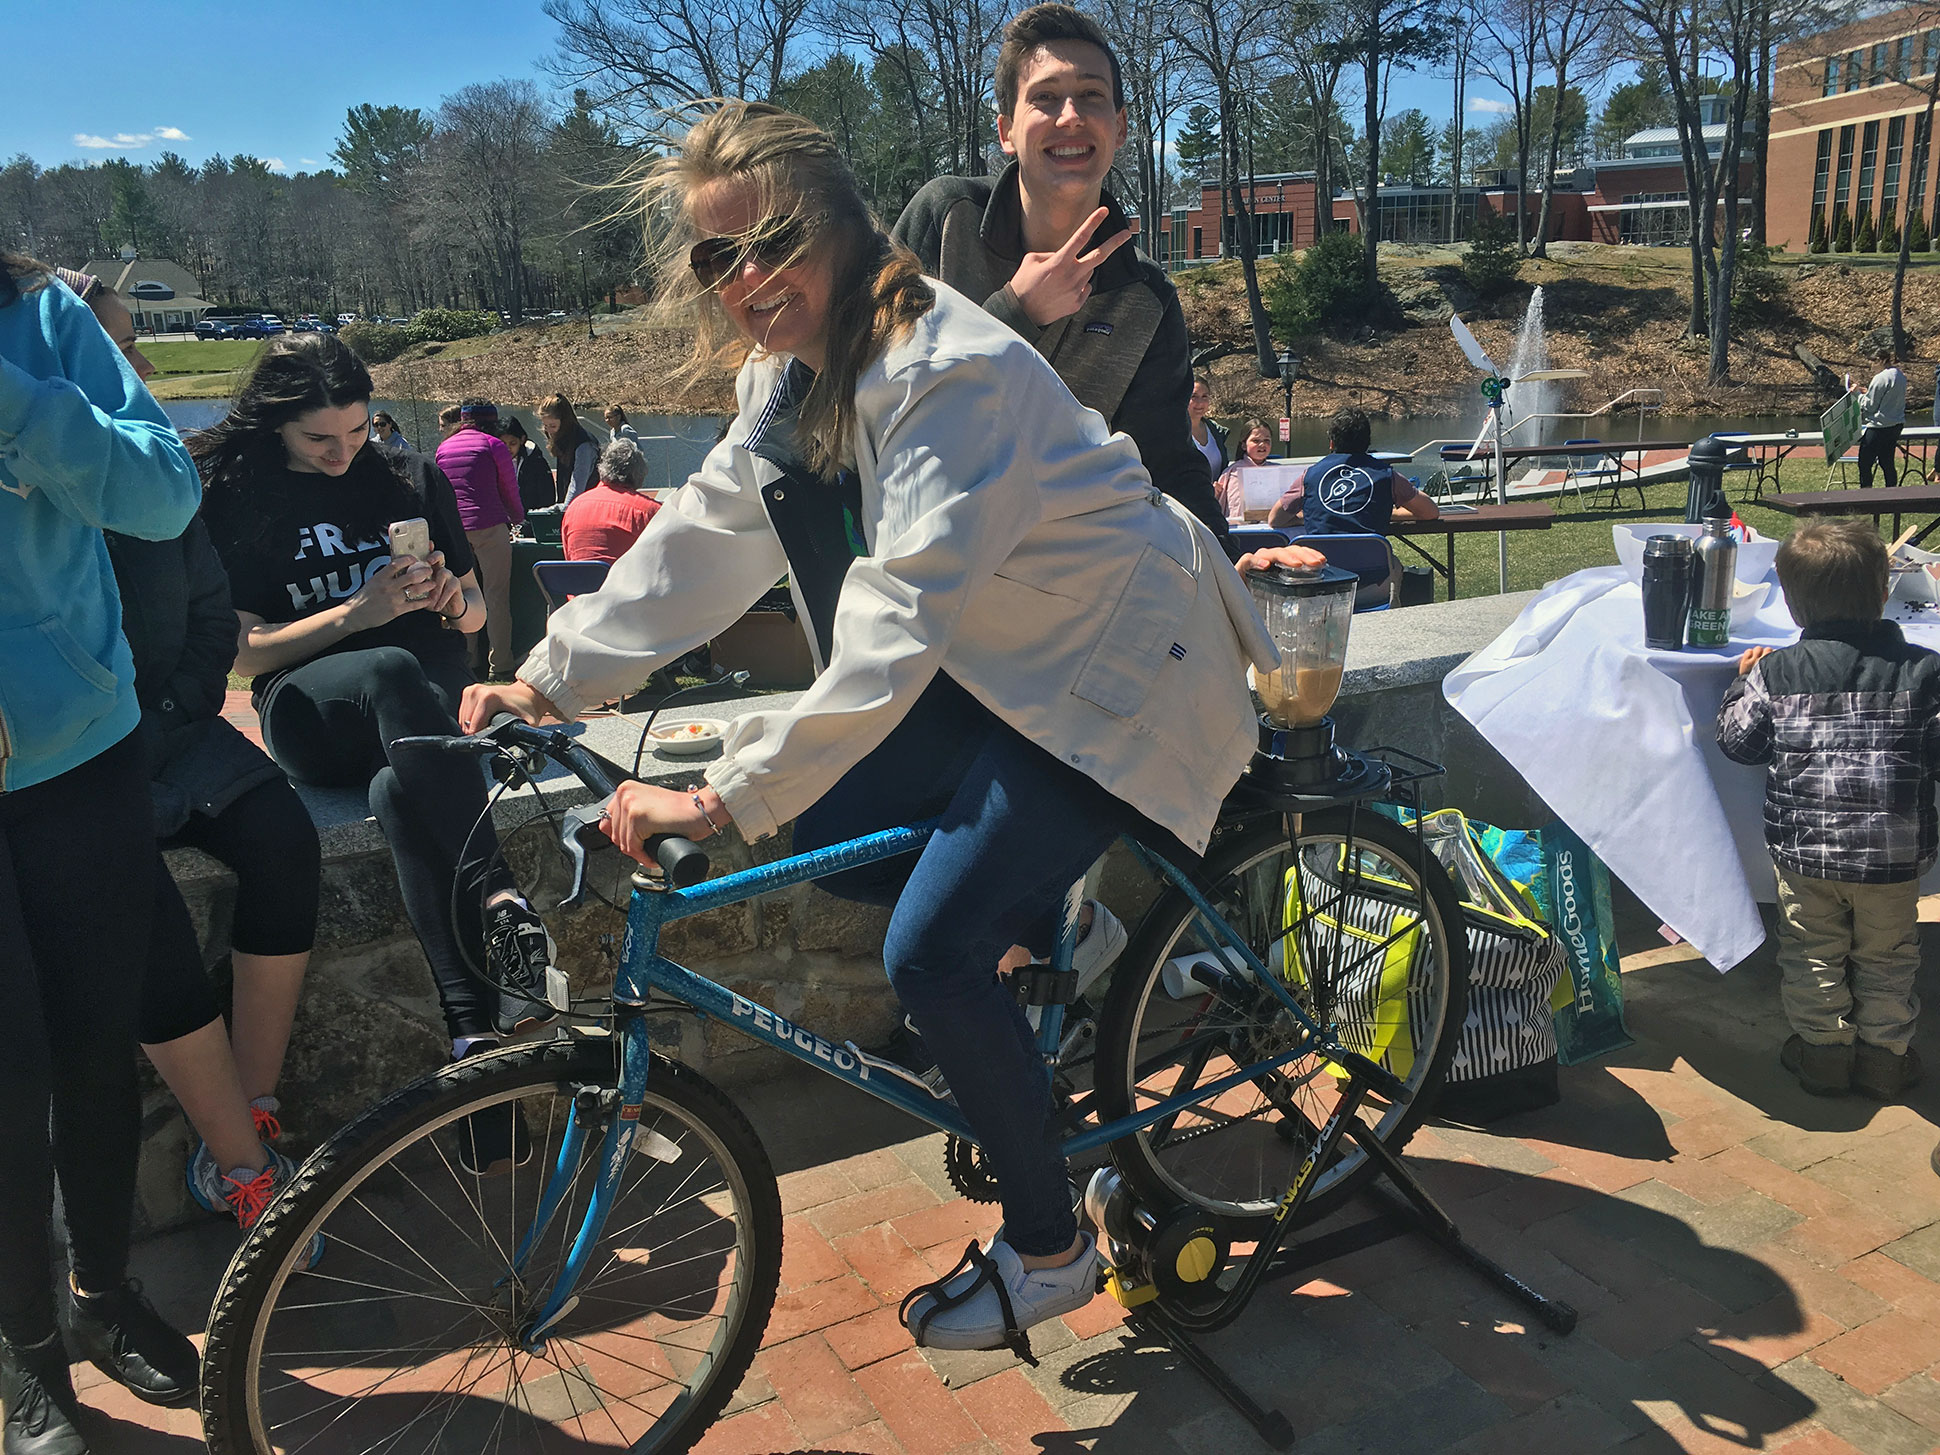 Staff member using the smoothie bike at the Earth Day Festival